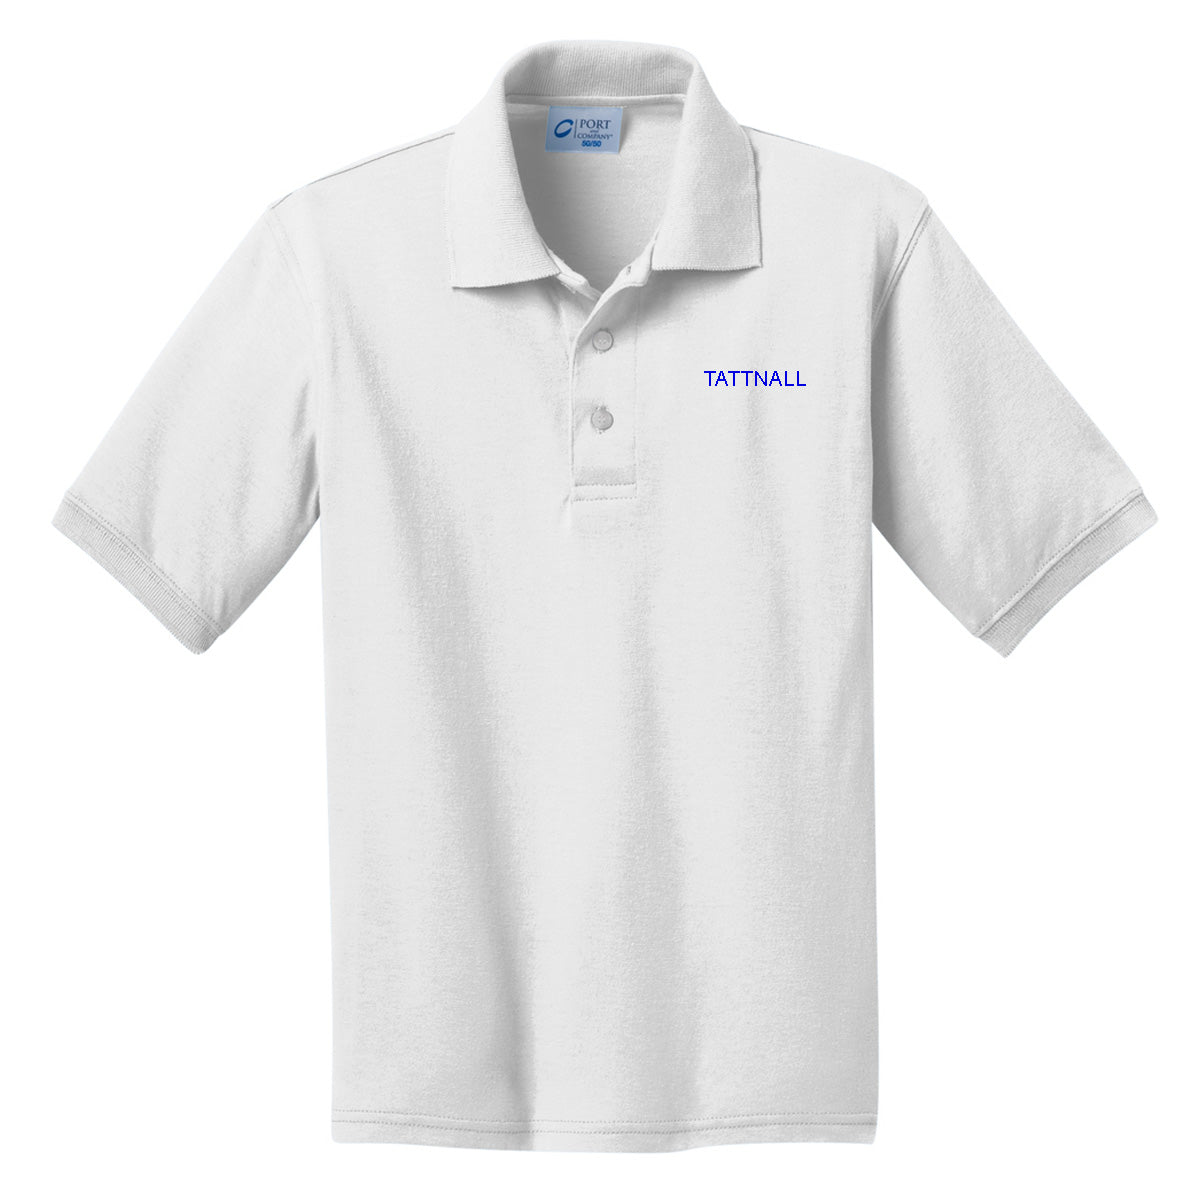 Tattnall - Toddler/Youth Polo with Tattnall - White (KP55Y) - Southern Grace Creations